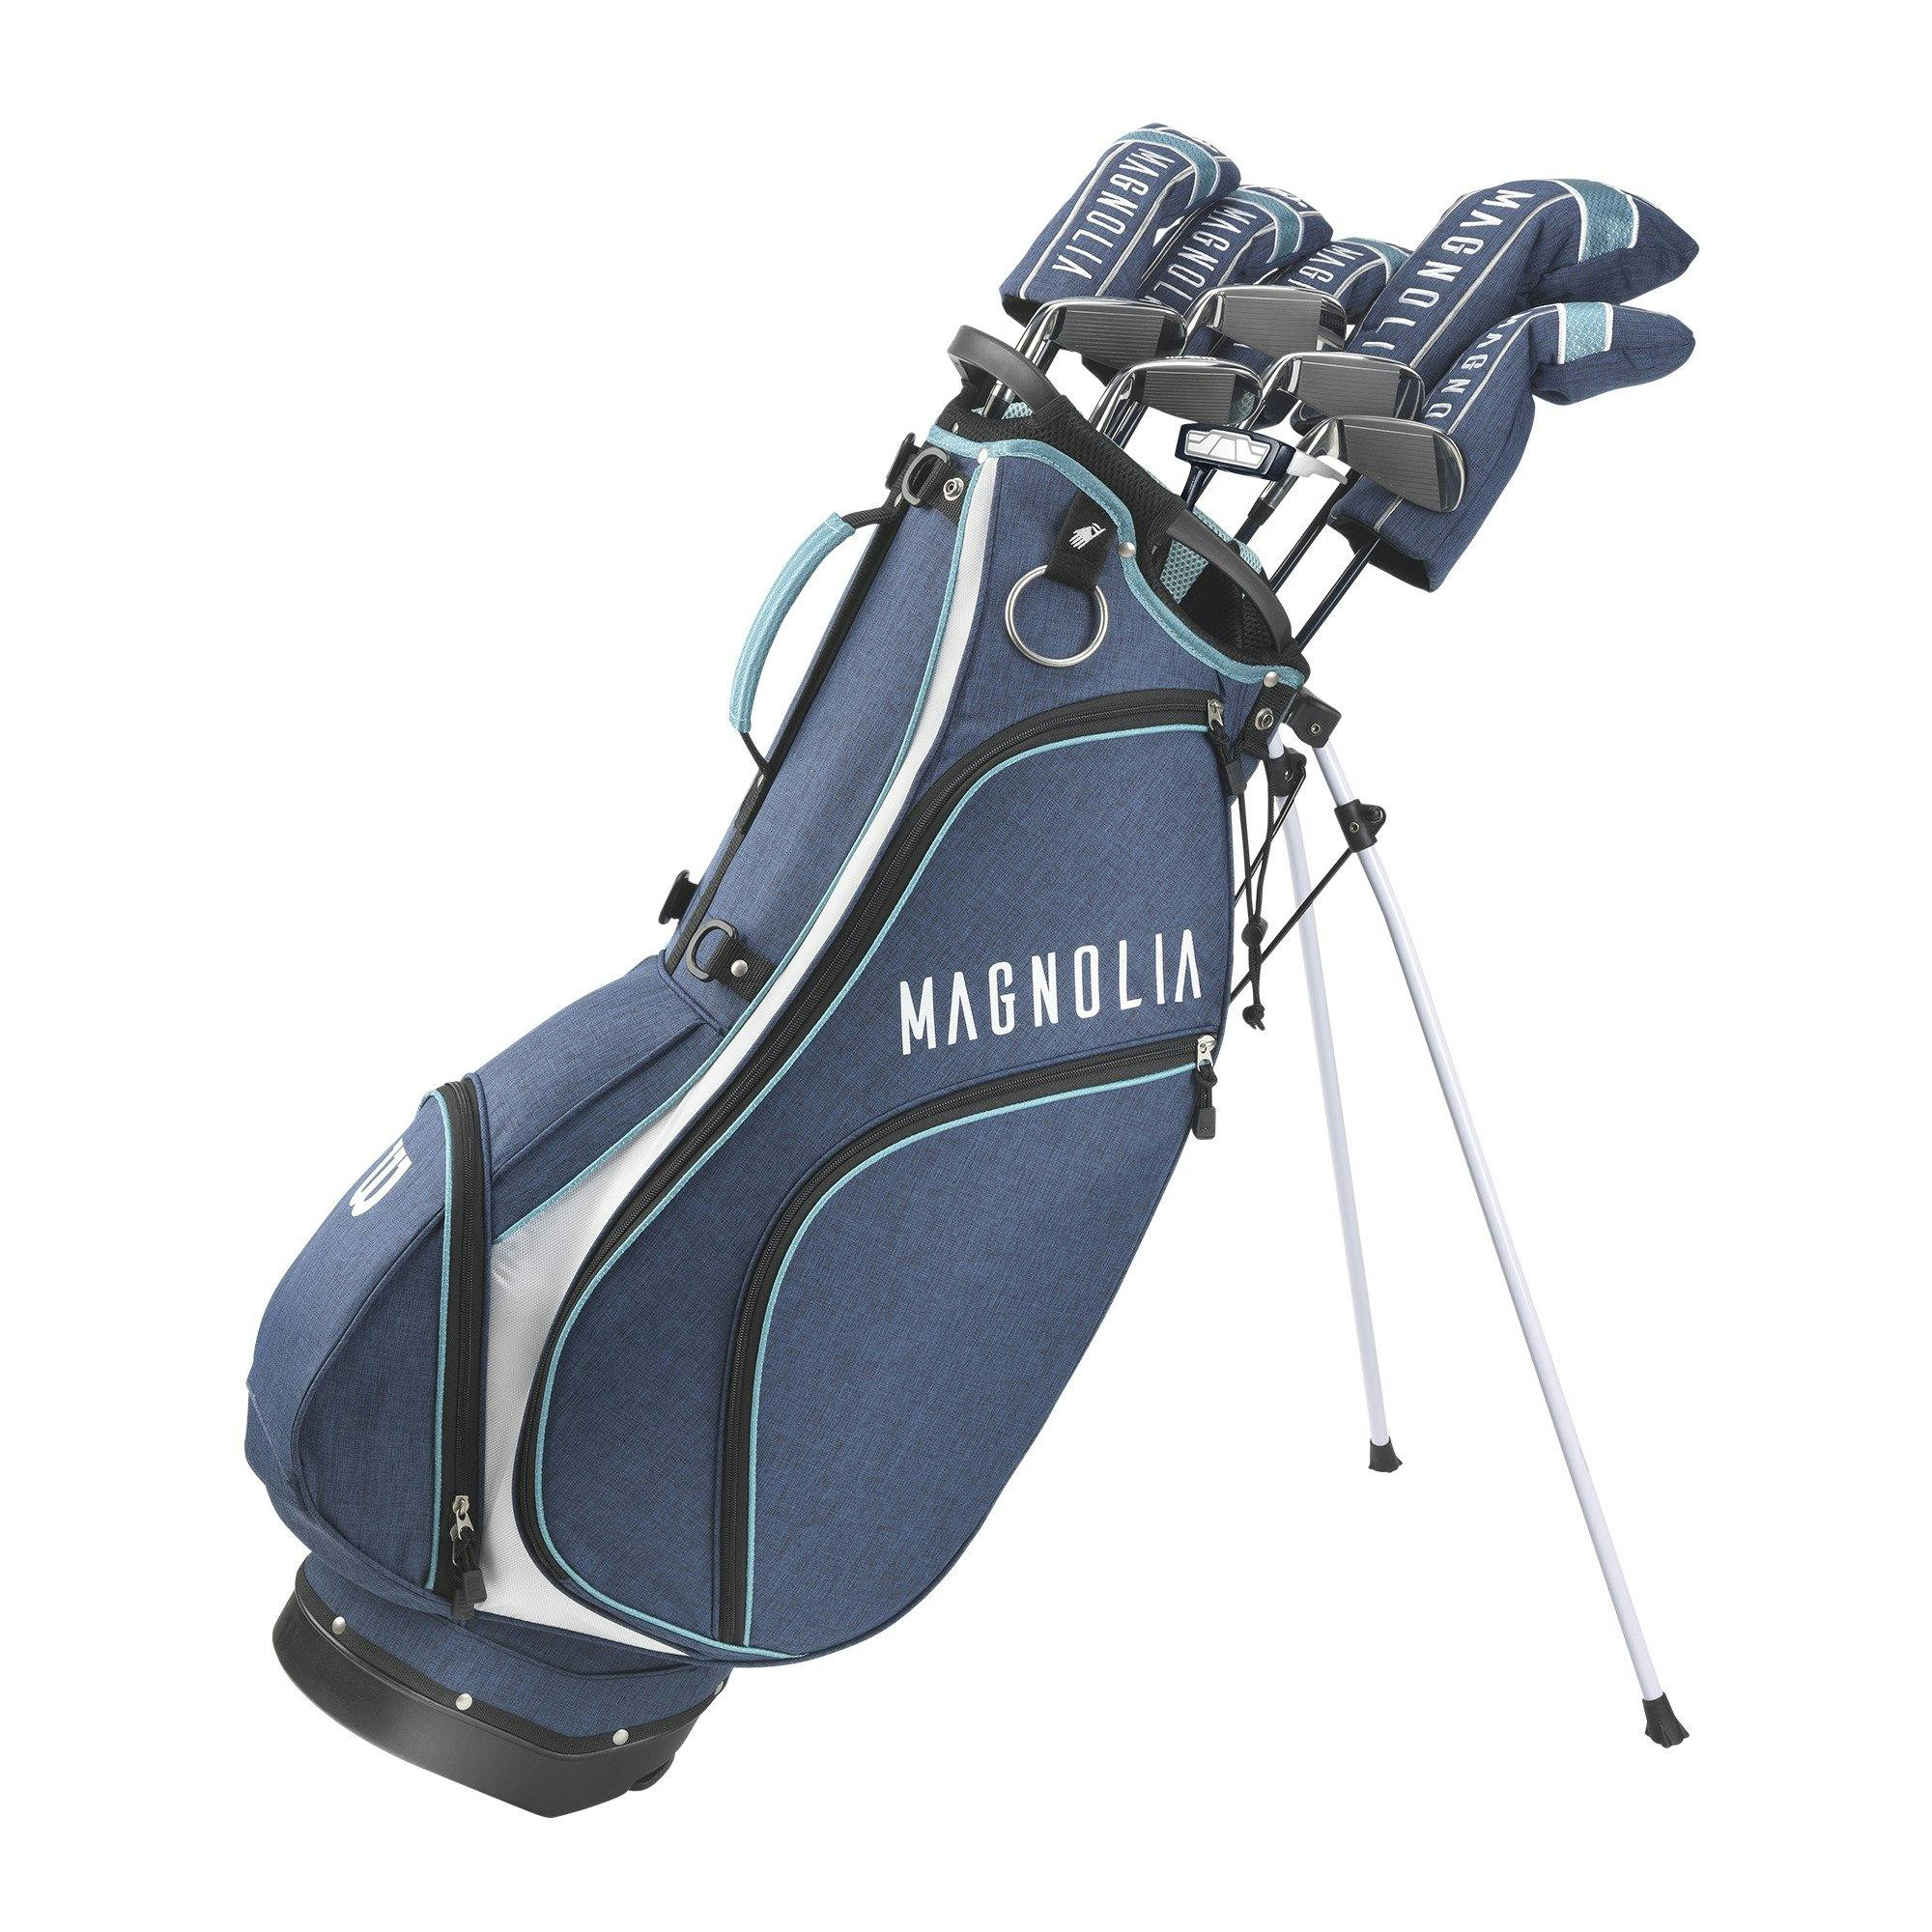 Wilson Women's Magnolia Complete Set with Carry Bag